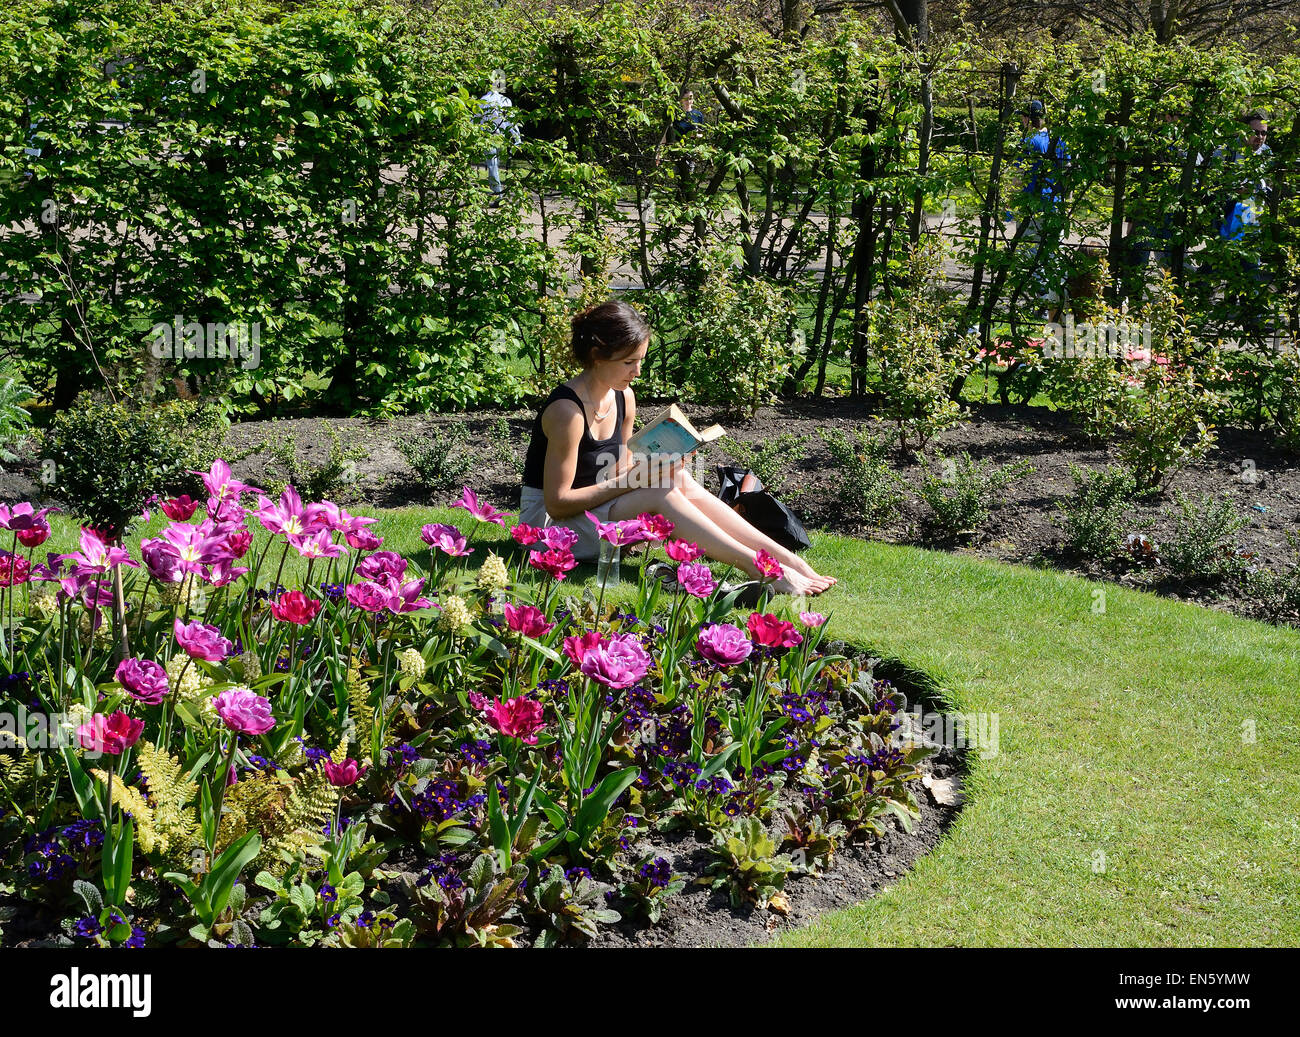 young woman sitting on grass & reading a book, Regents Park, London Stock Photo